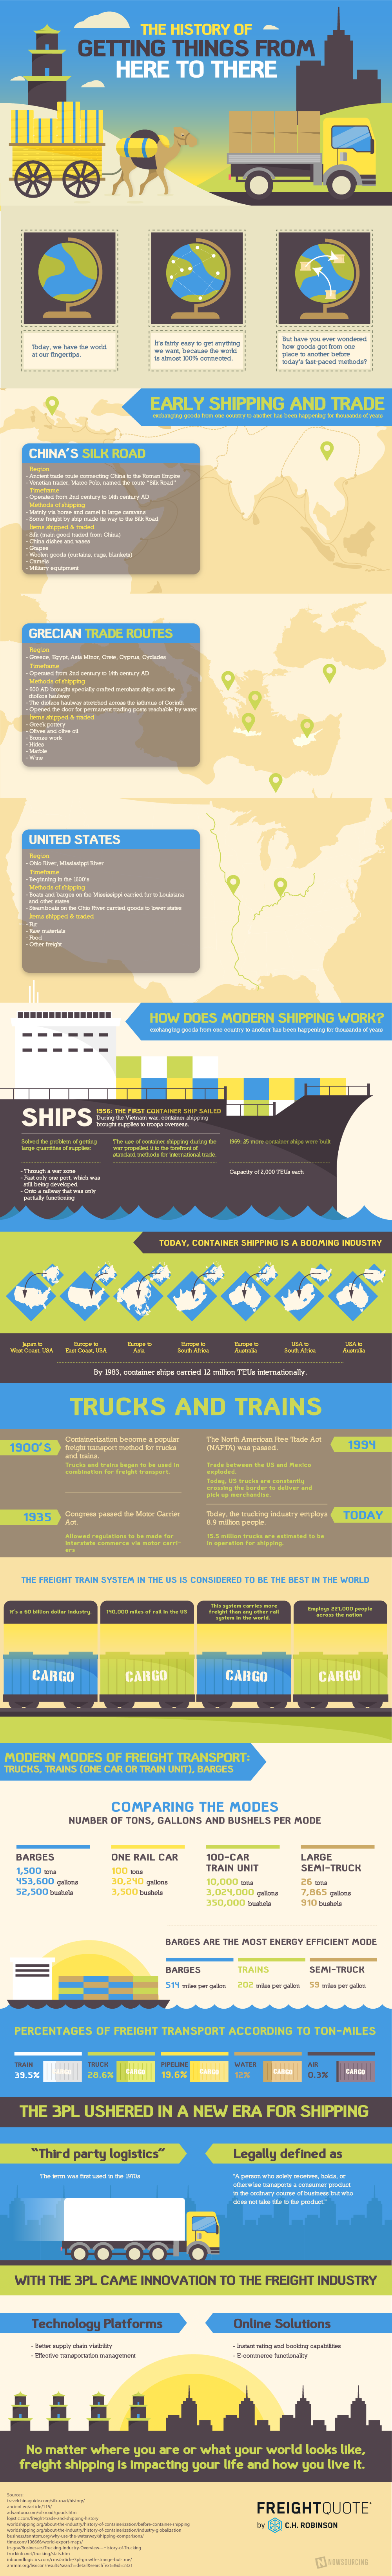 History of freight shipping